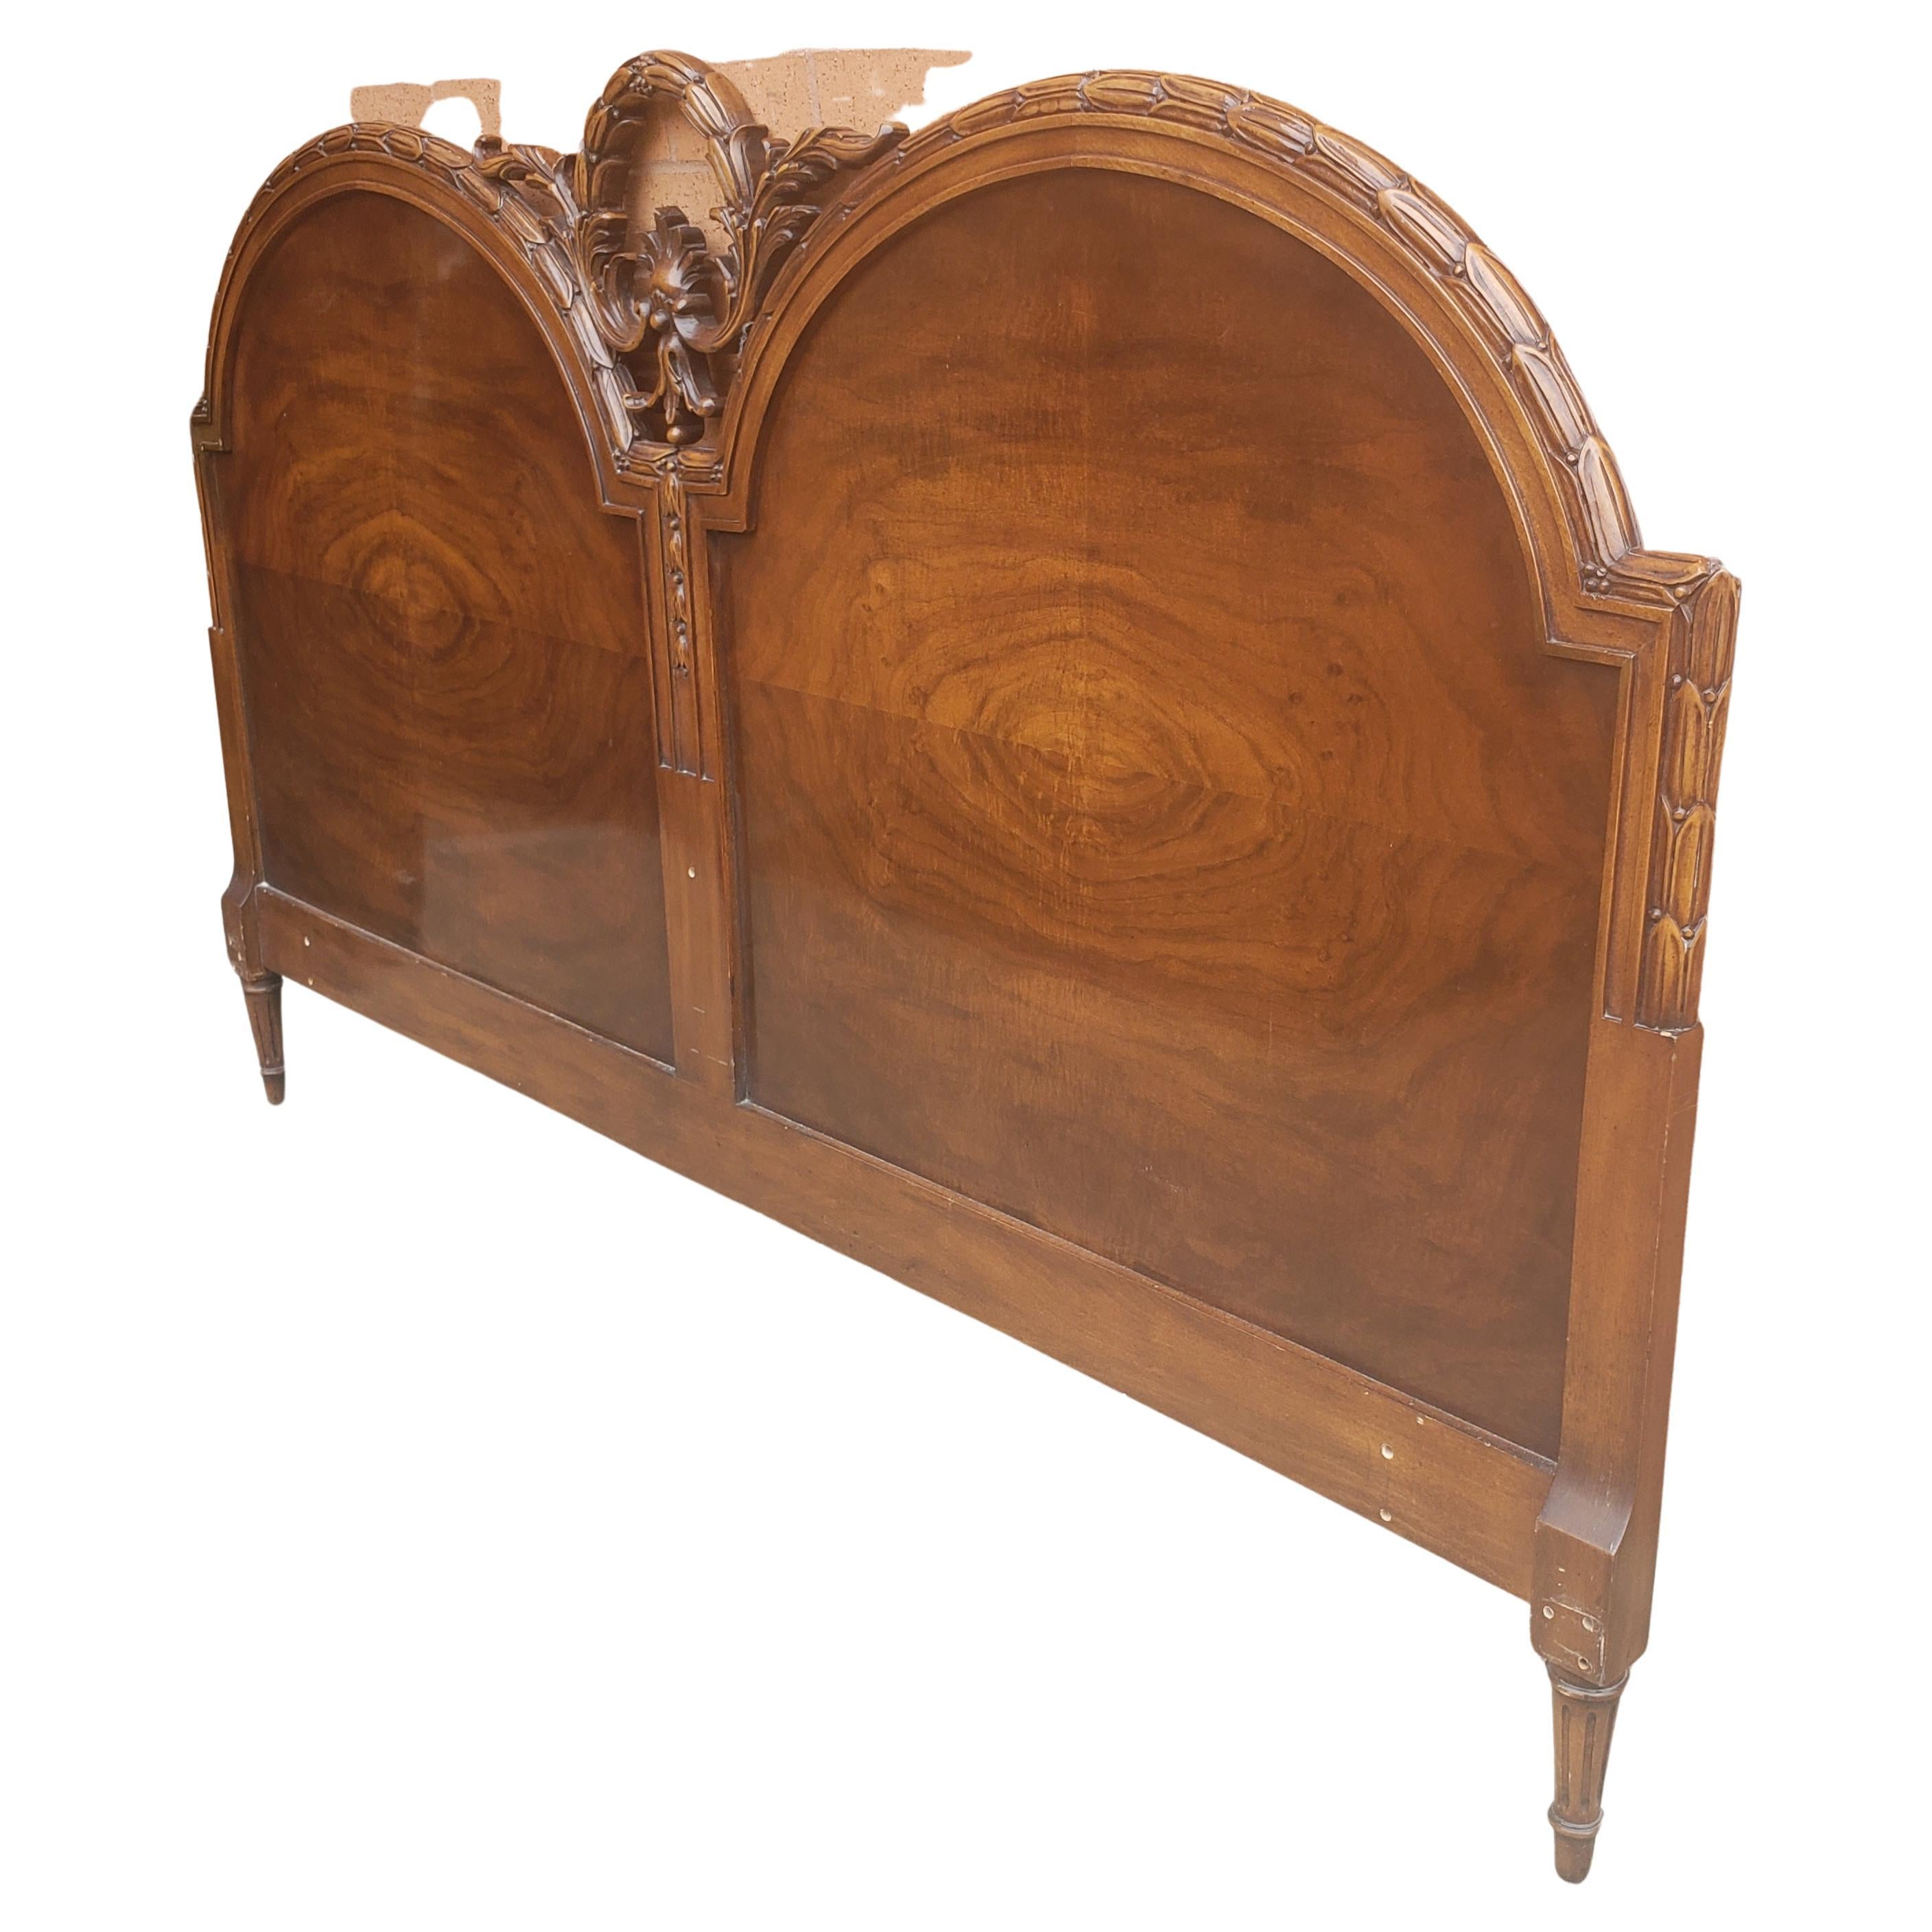 A monumental French baroque style carved mahogany king size headboard in excellent vintage condition.
Measures 78.5 inches in width and stands 45.5 inches tall.